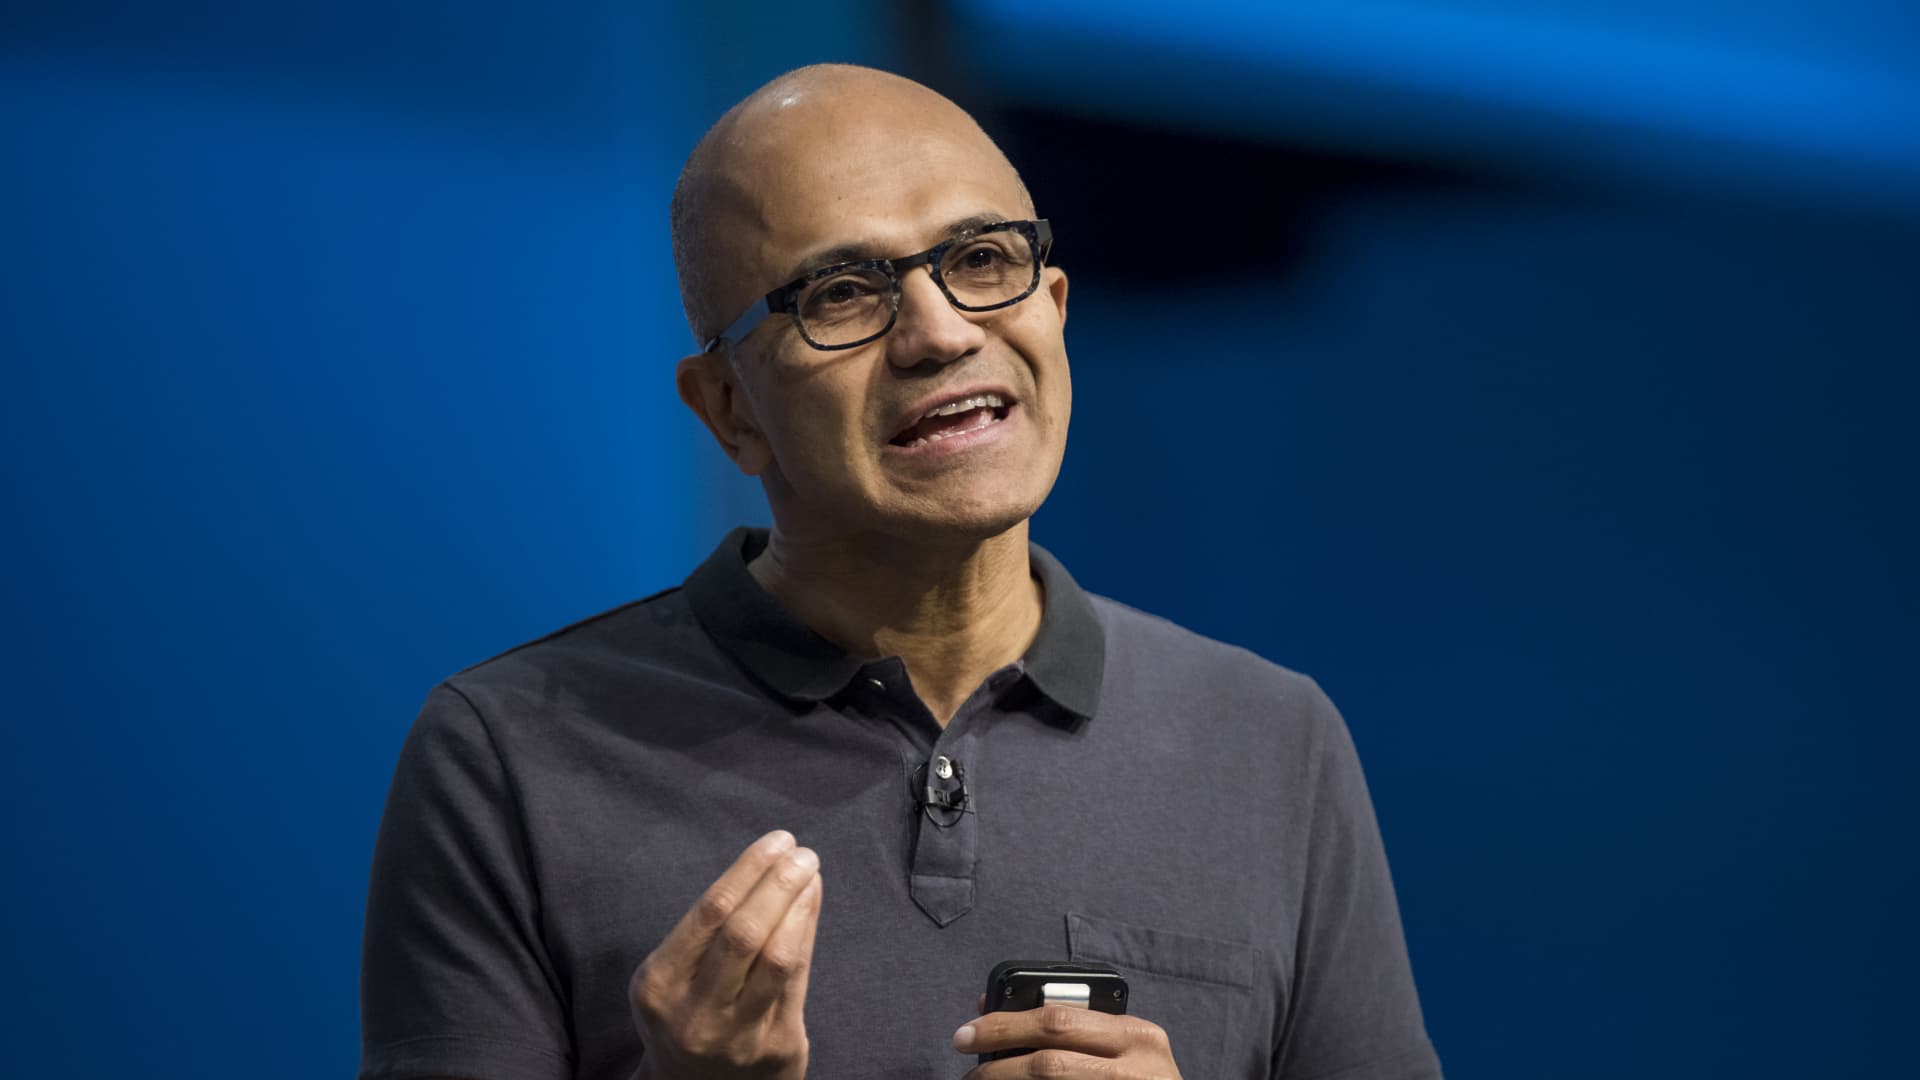 Satya Nadella, chief executive officer of Microsoft Corp., speaks at Microsoft's Build developer conference in San Francisco on March 30, 2016.